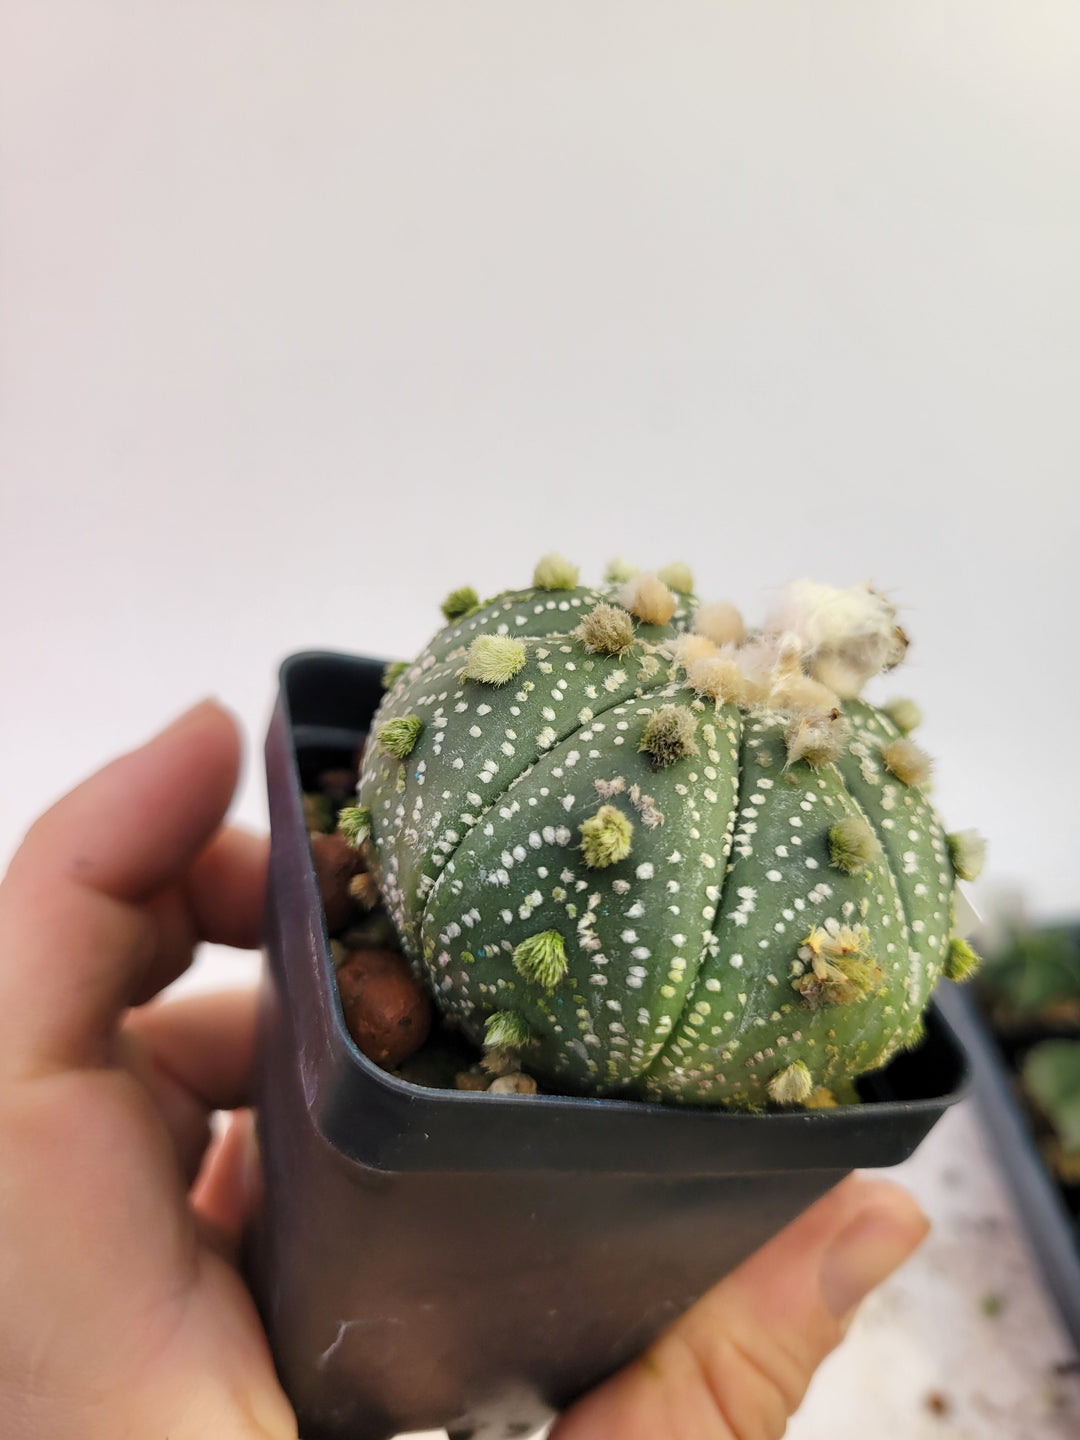 Astrophytum asterias cv. Superkabuto, rooted and established Deaw Cactus- Flowering Seed Grown#T28 - Nice Plants Good Pots